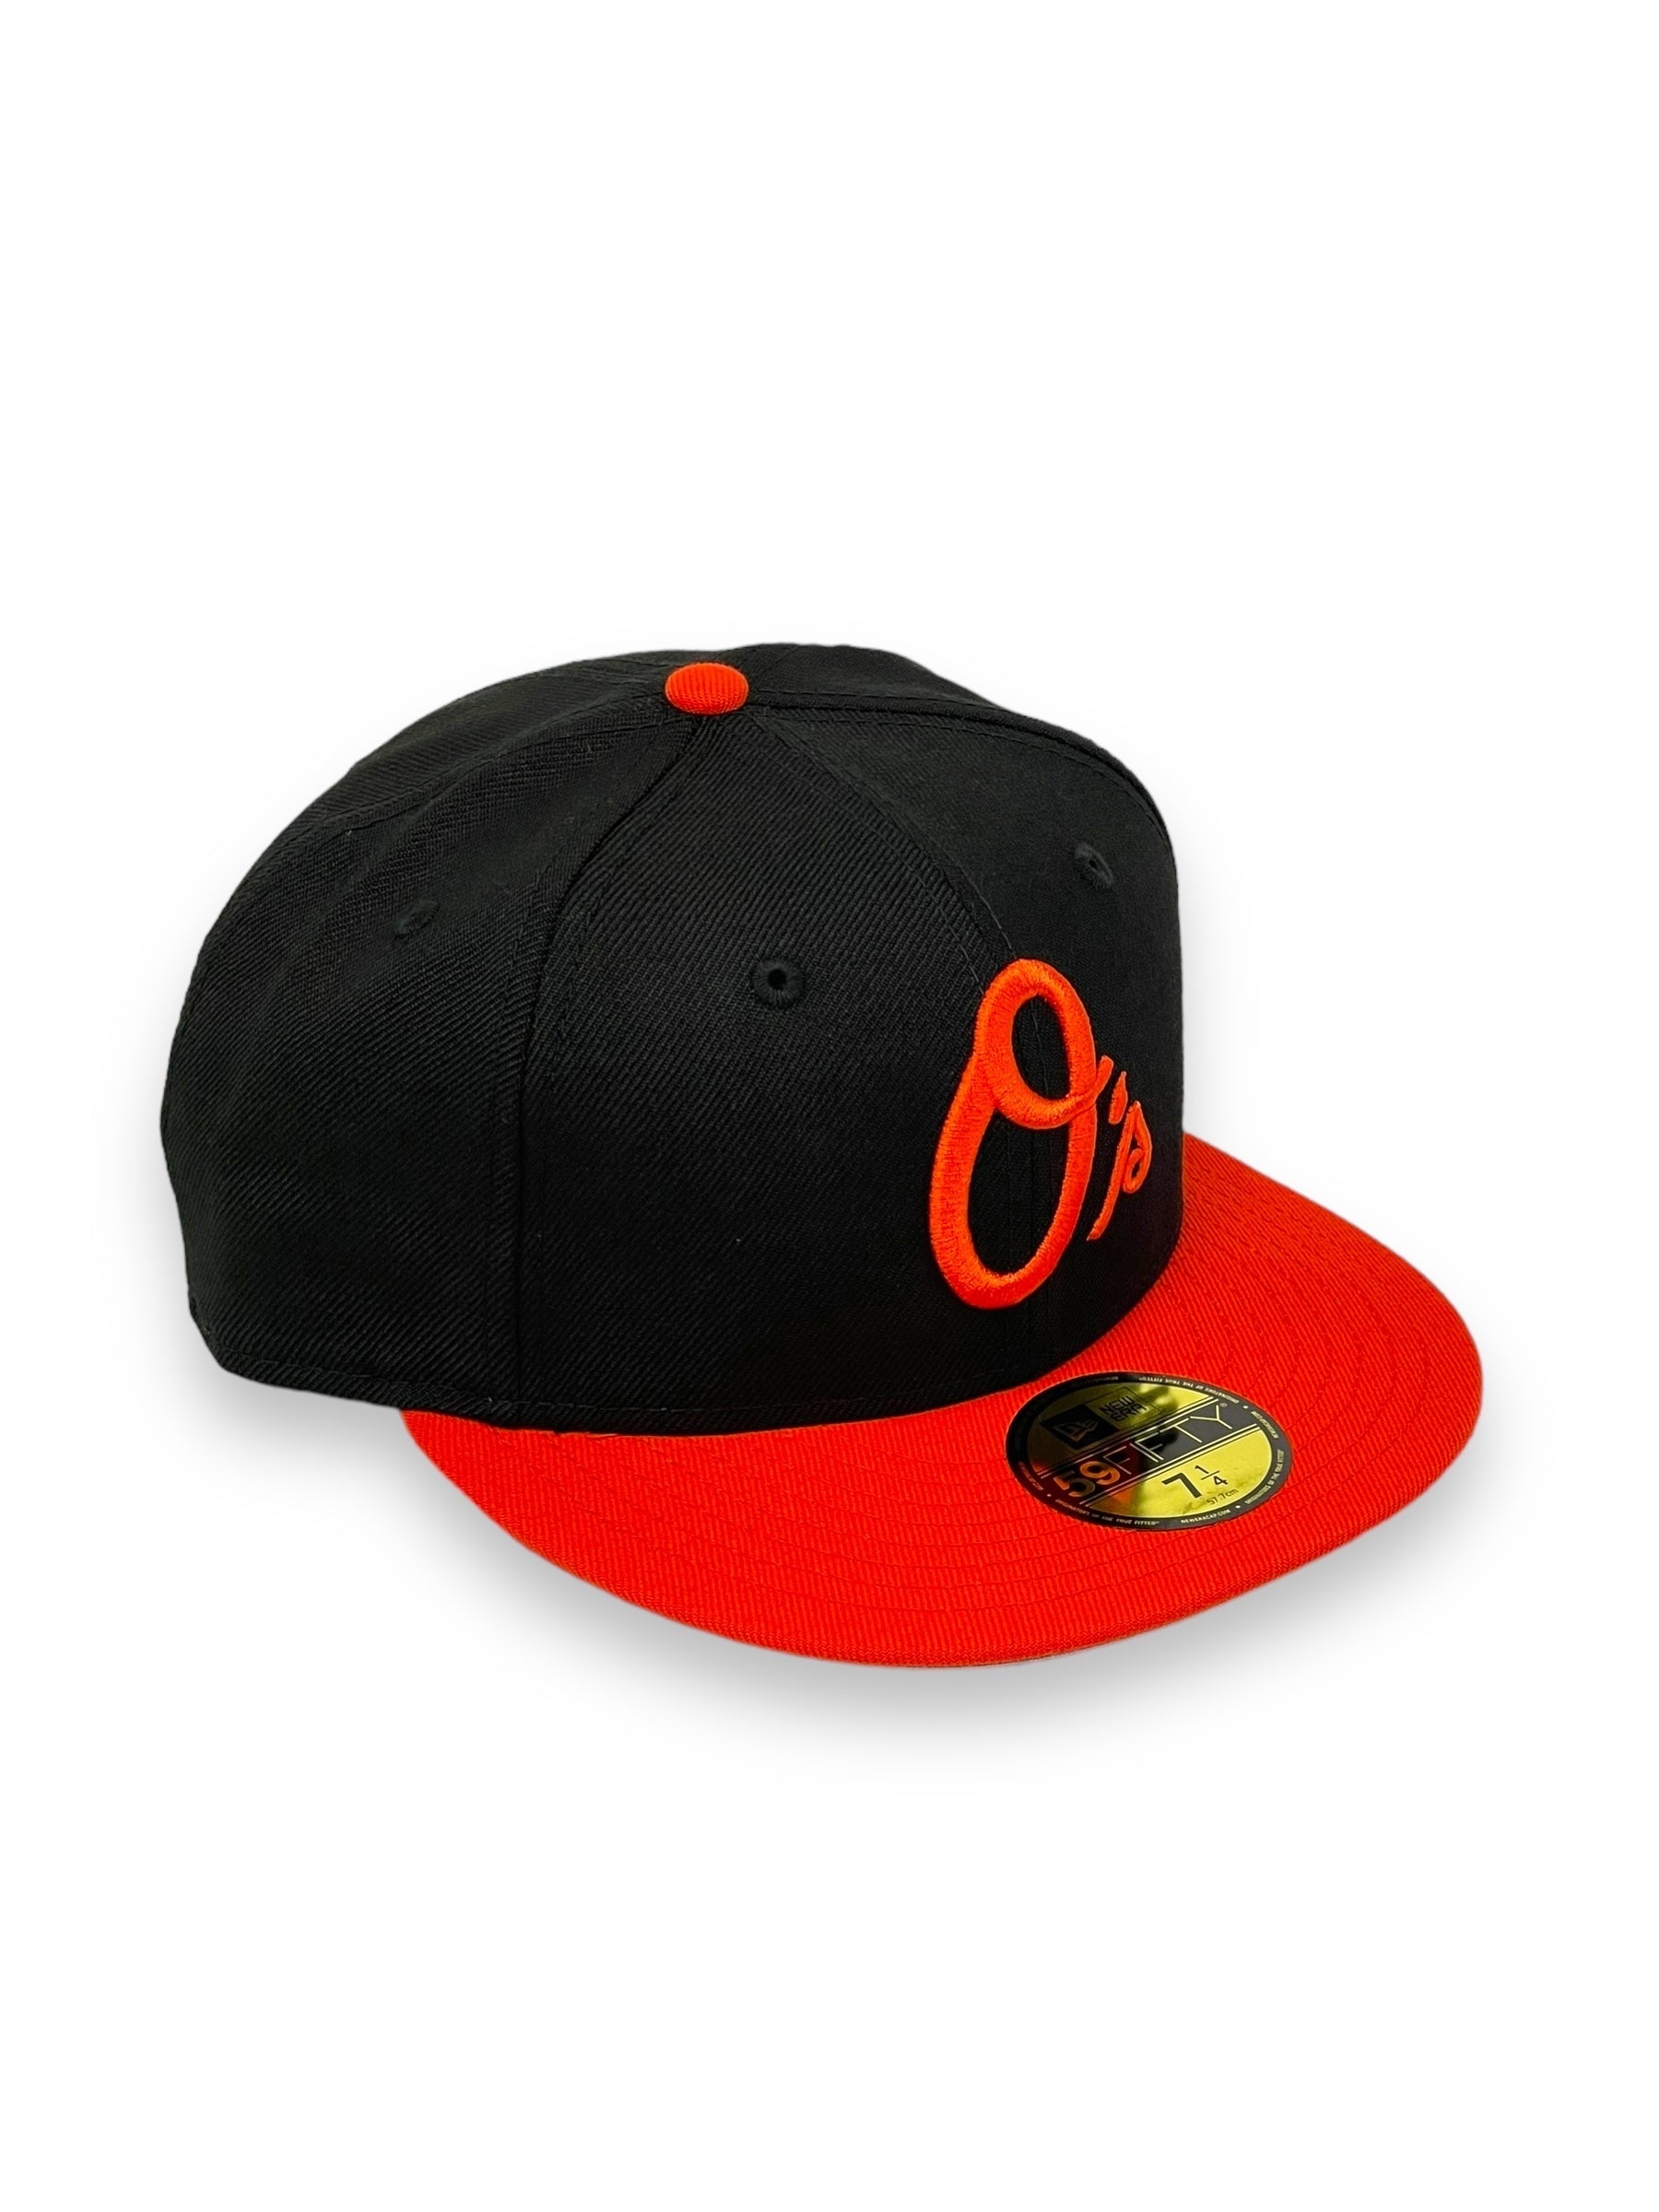 BALTIMORE ORIOLES (2005/2006 ALT "O-LOGO") NEW ERA 59FIFTY FITTED